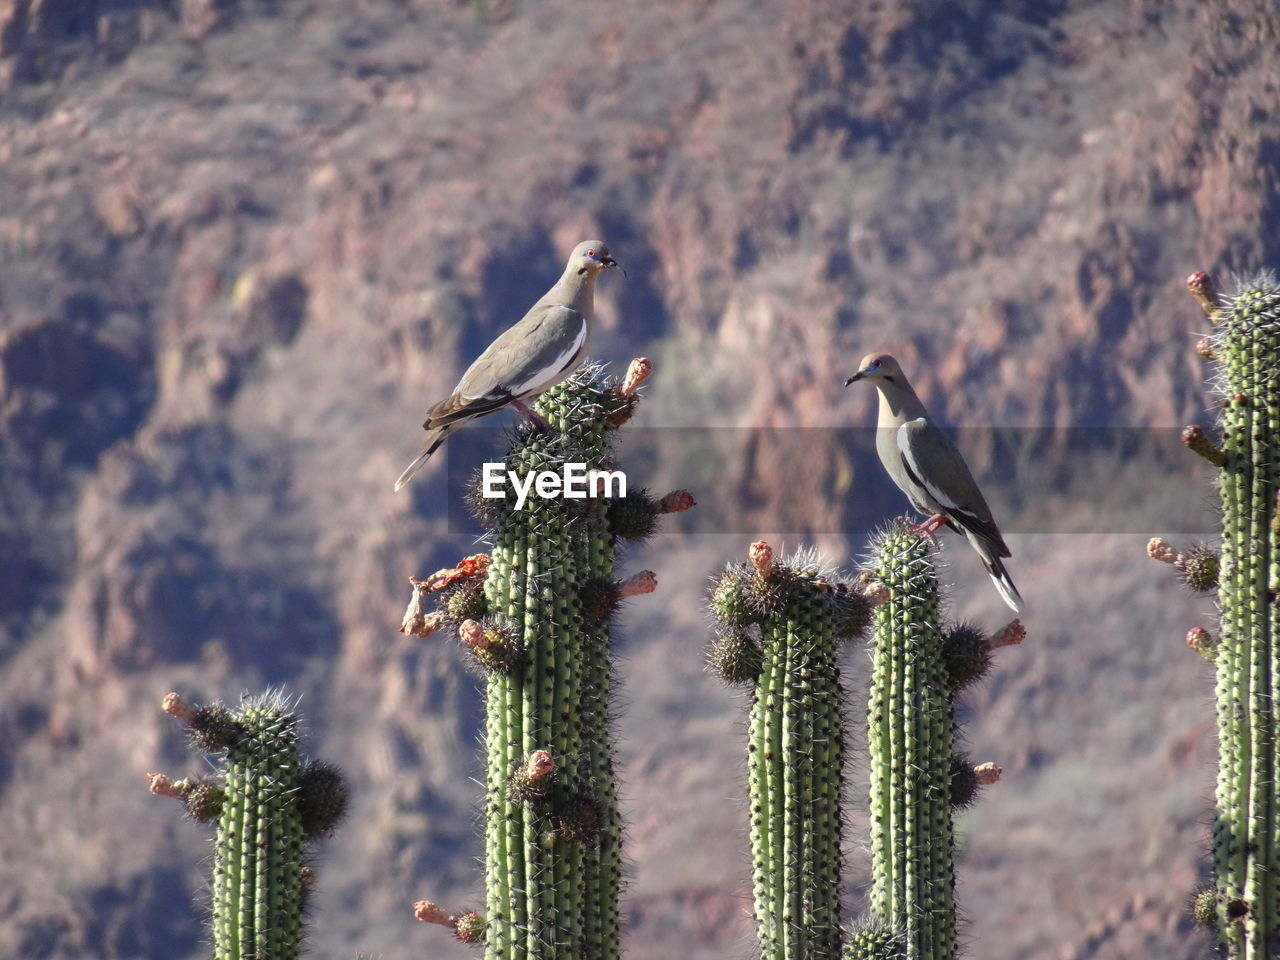 Two mourning doves perch atop a pipe organ cactus in the sonoran desert. 